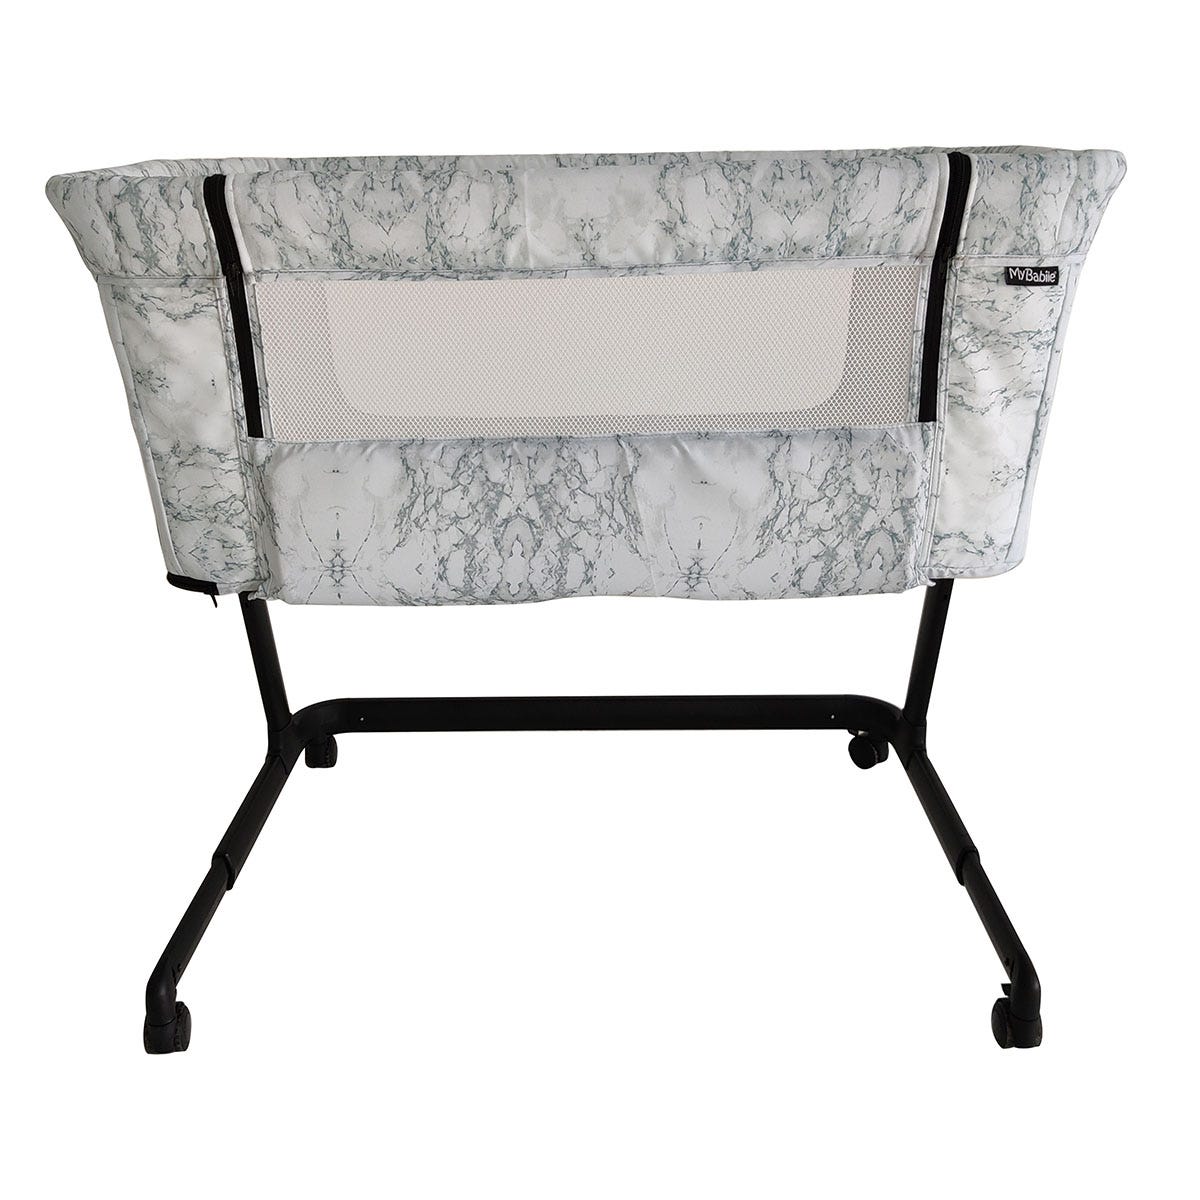 My Babiie Closer Bedside Crib - Marble